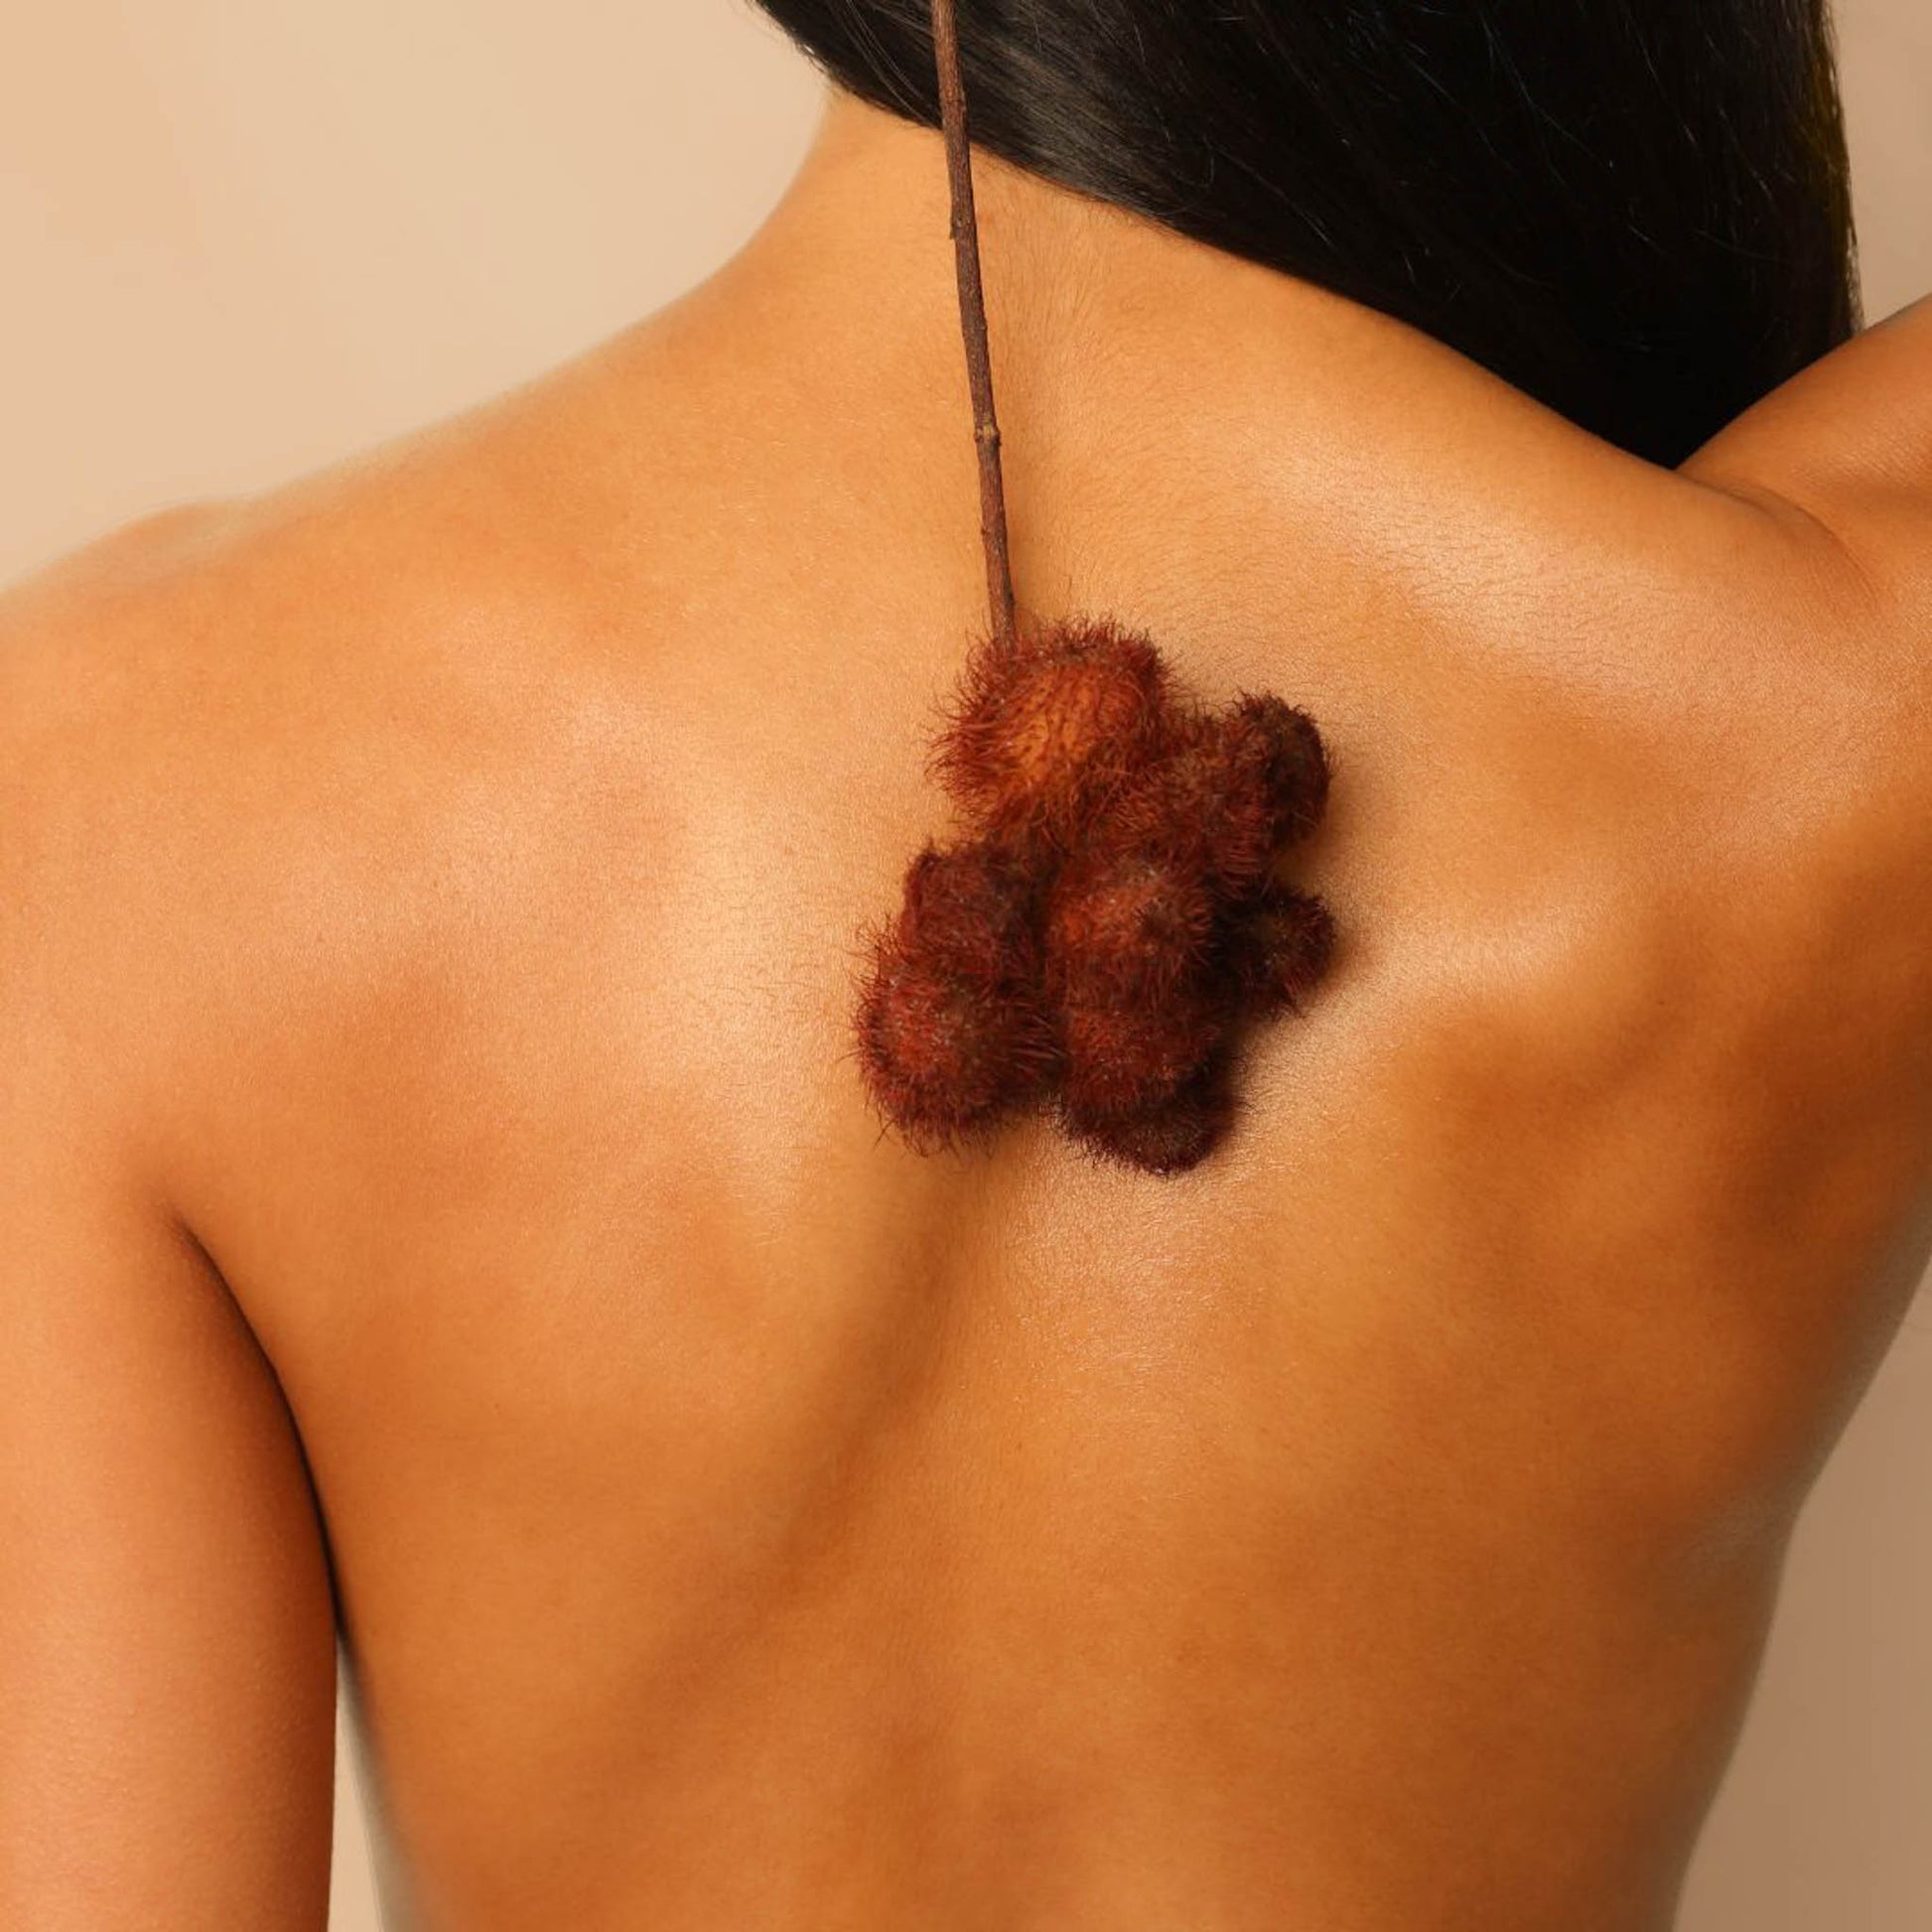 Model holding achiote raw ingredient behind back